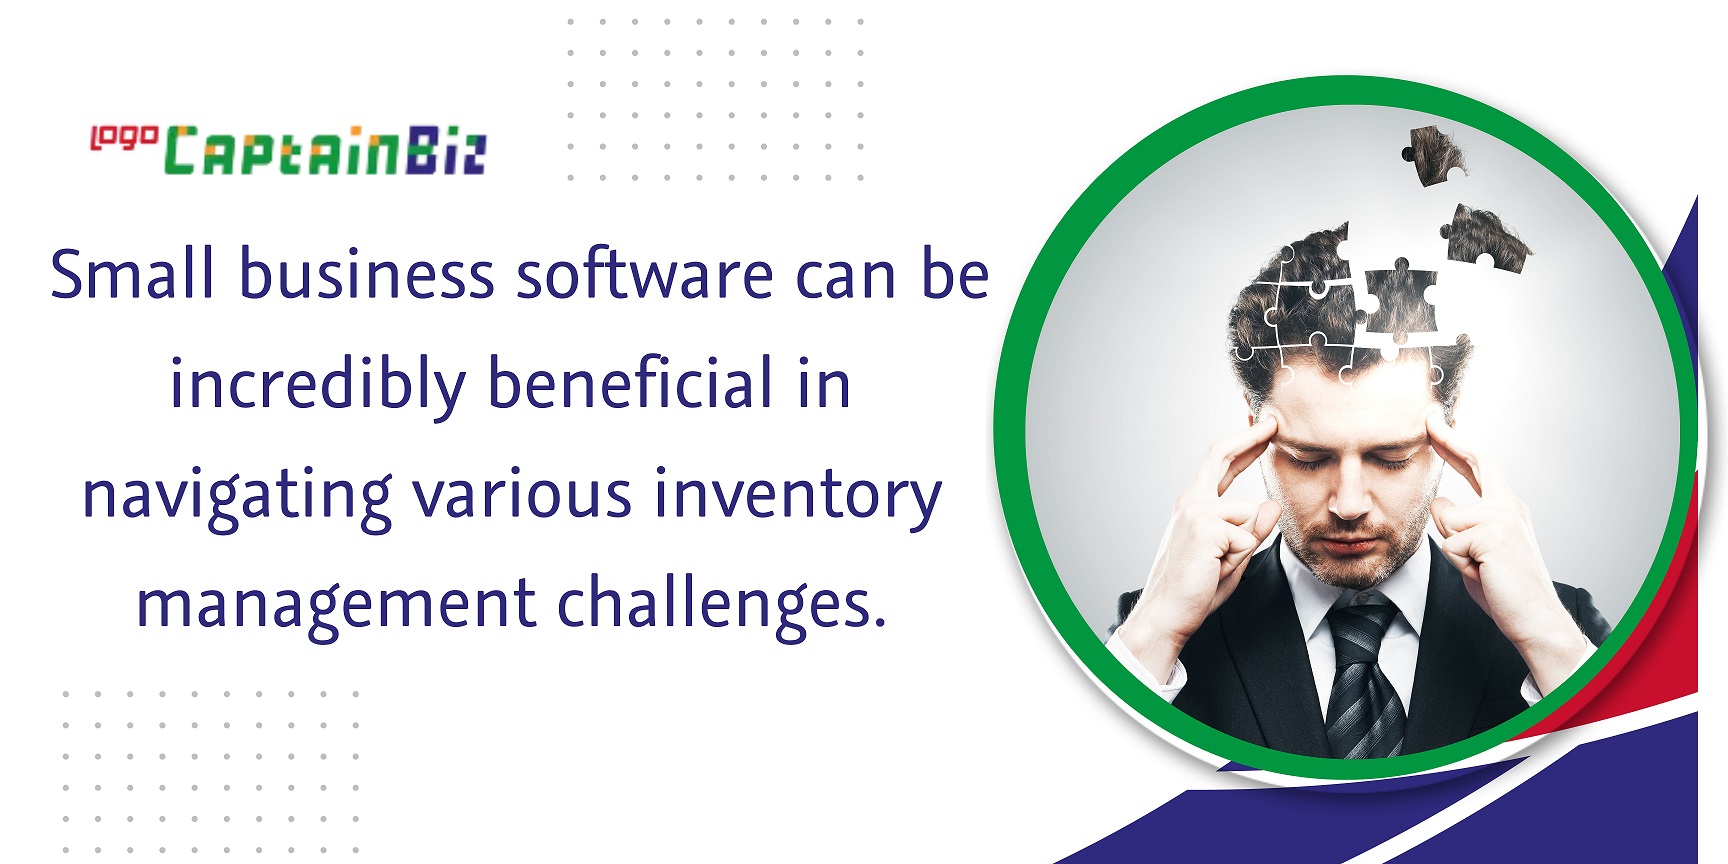 CaptainBiz: navigate these inventory management challenges using small business software